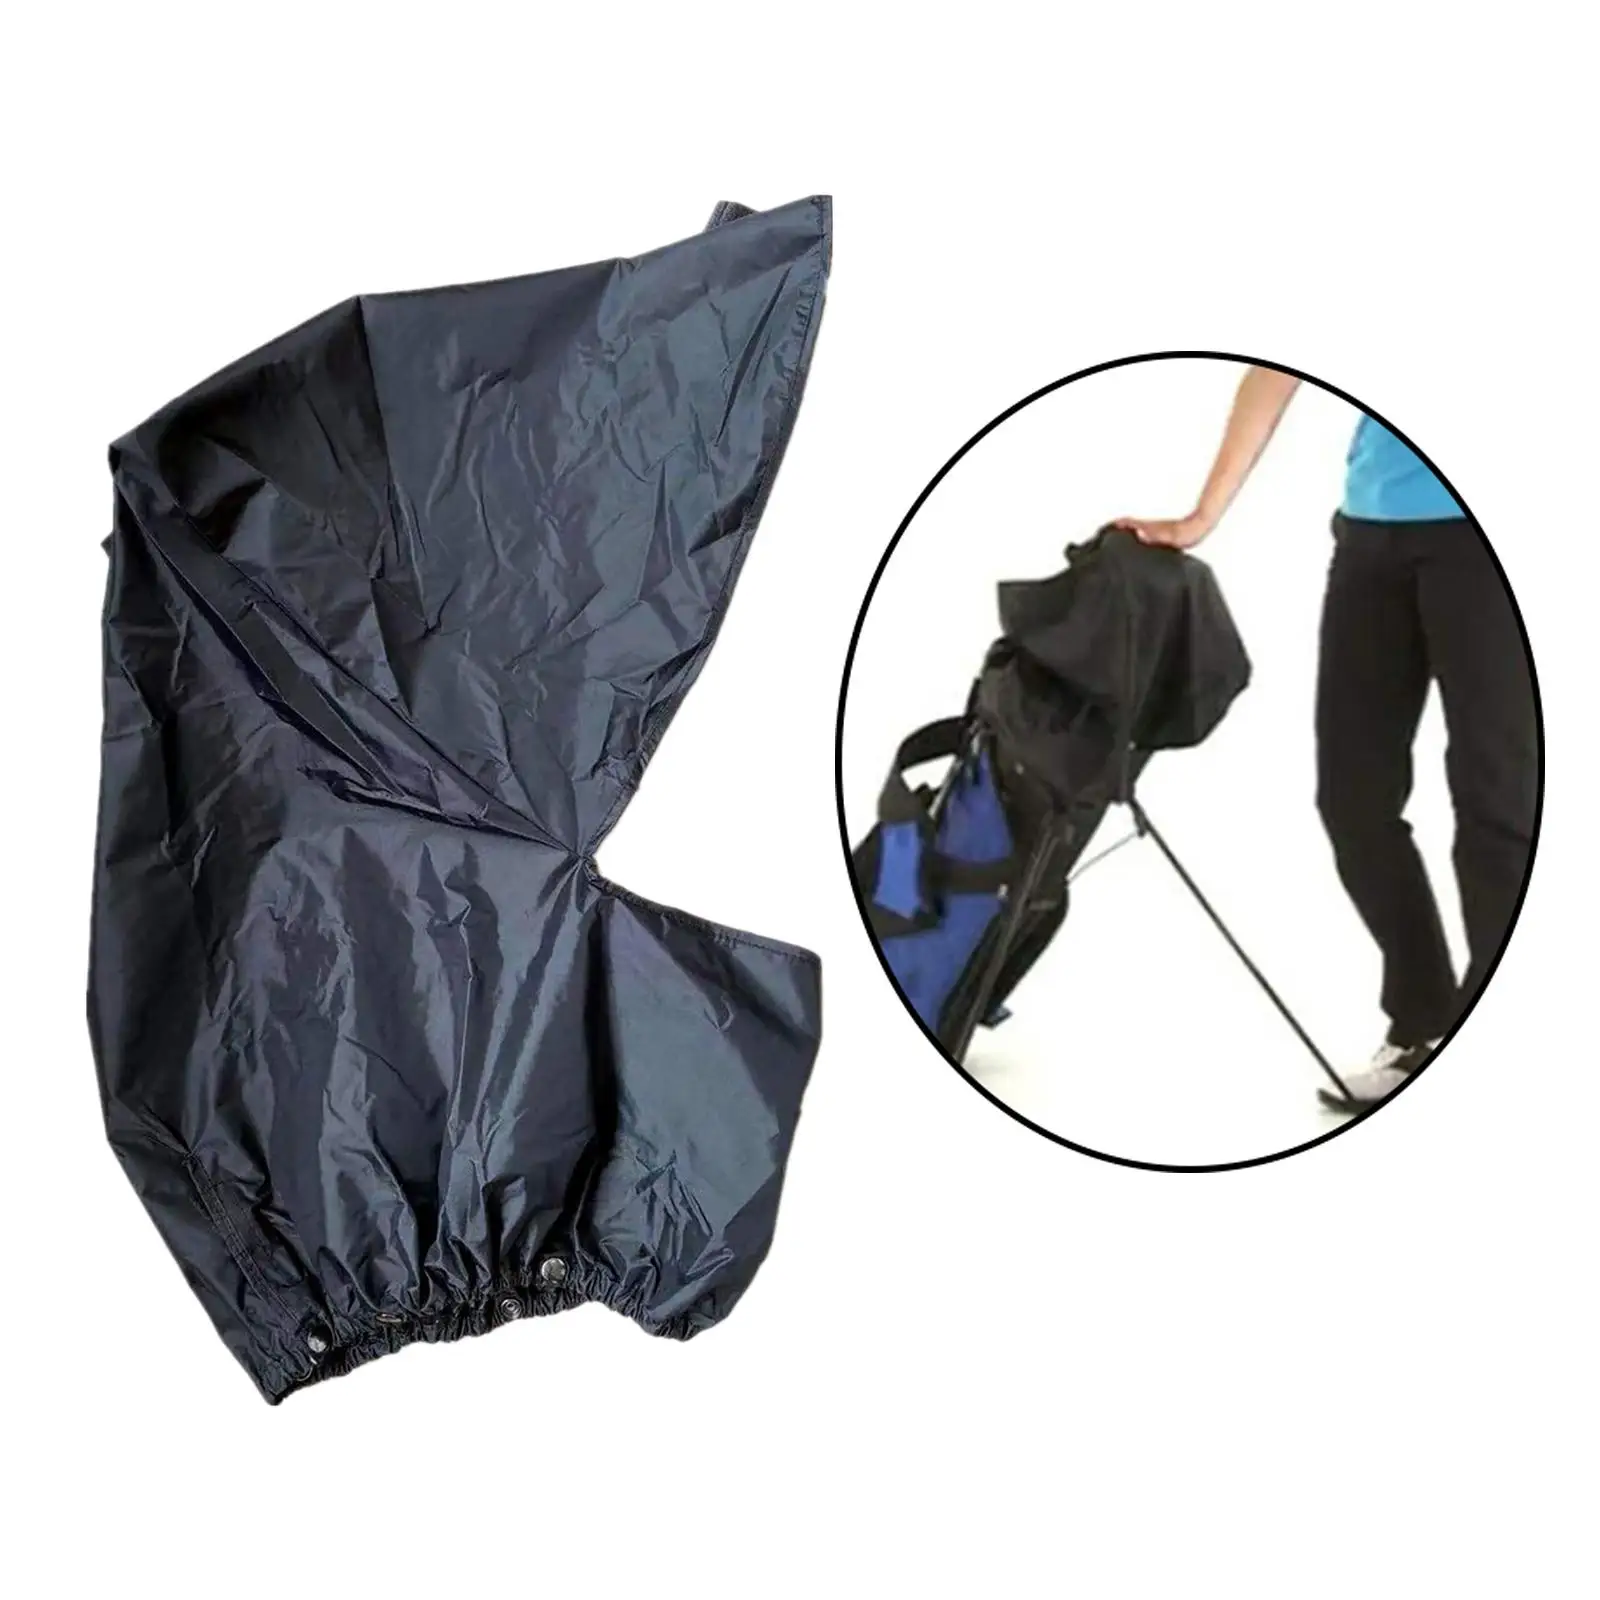 Golf Travel Cover Hood Lightweight Black Protector for Golf Bags Tourbags Golf Club Women